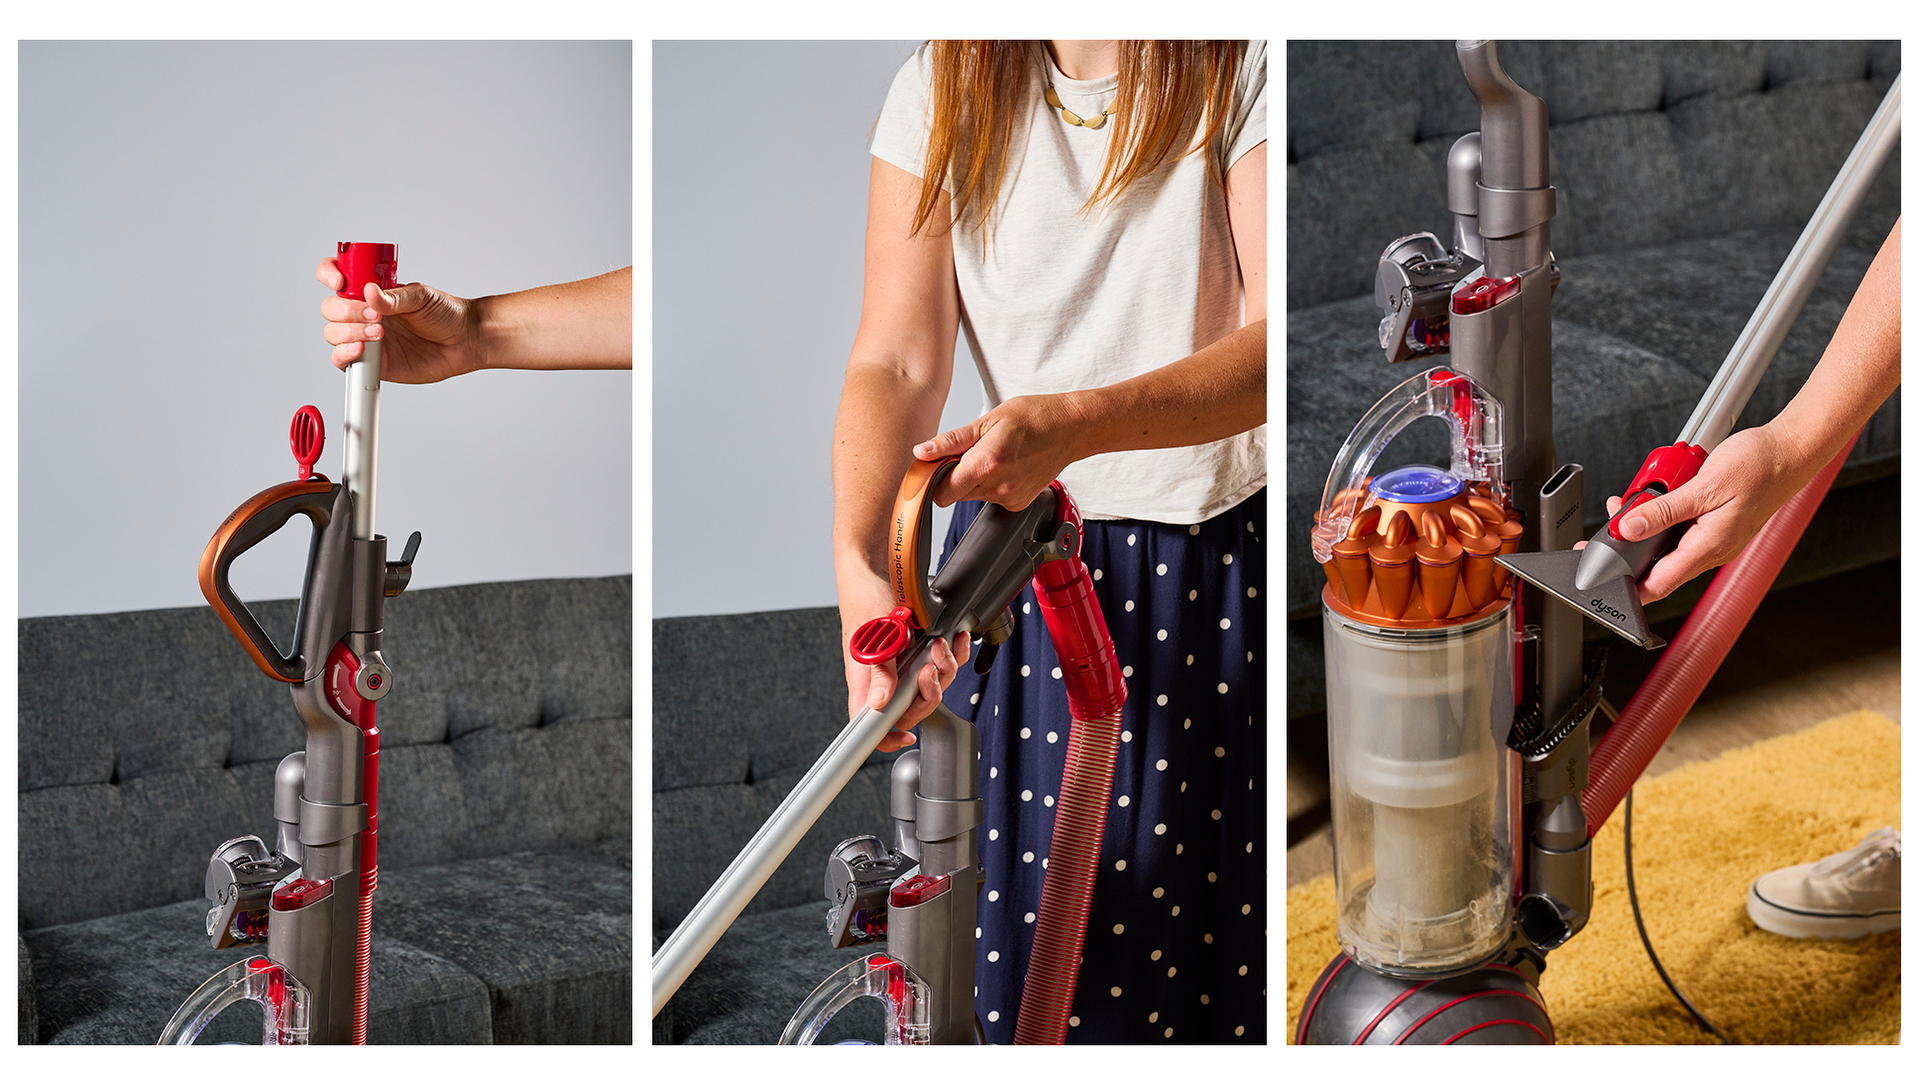 Three images showing how the flexible hose can be extended on the Dyson Ball Animal upright vacuum cleaner